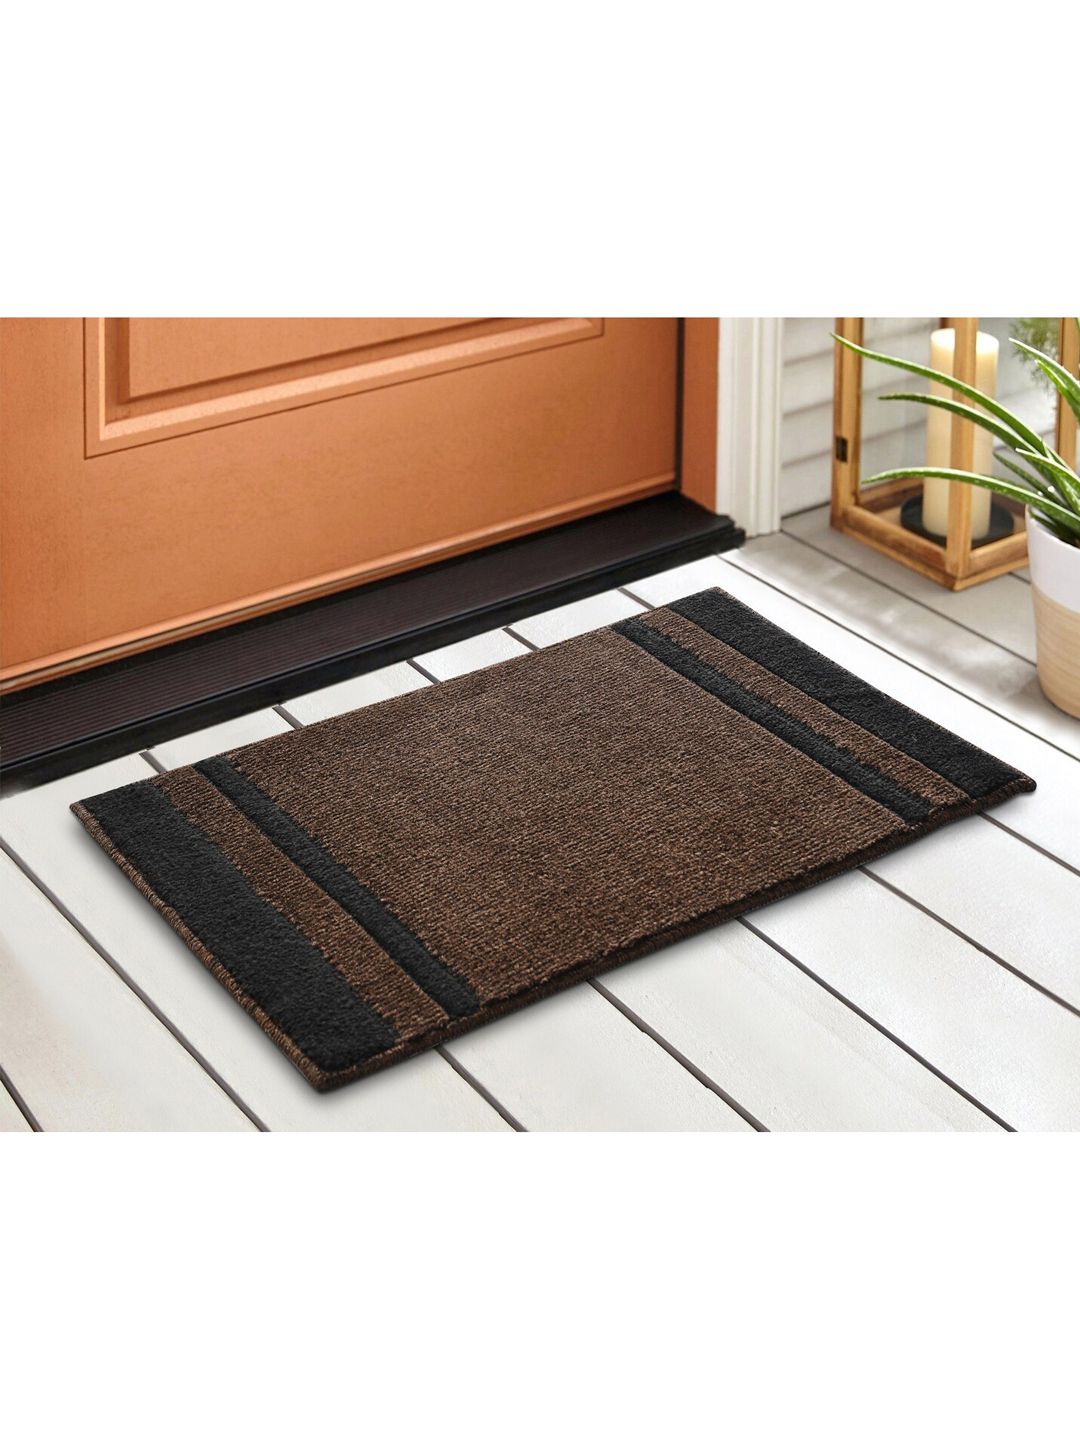 Saral Home Set Of 2 Solid Cotton Anti-Skid Door Mats Price in India